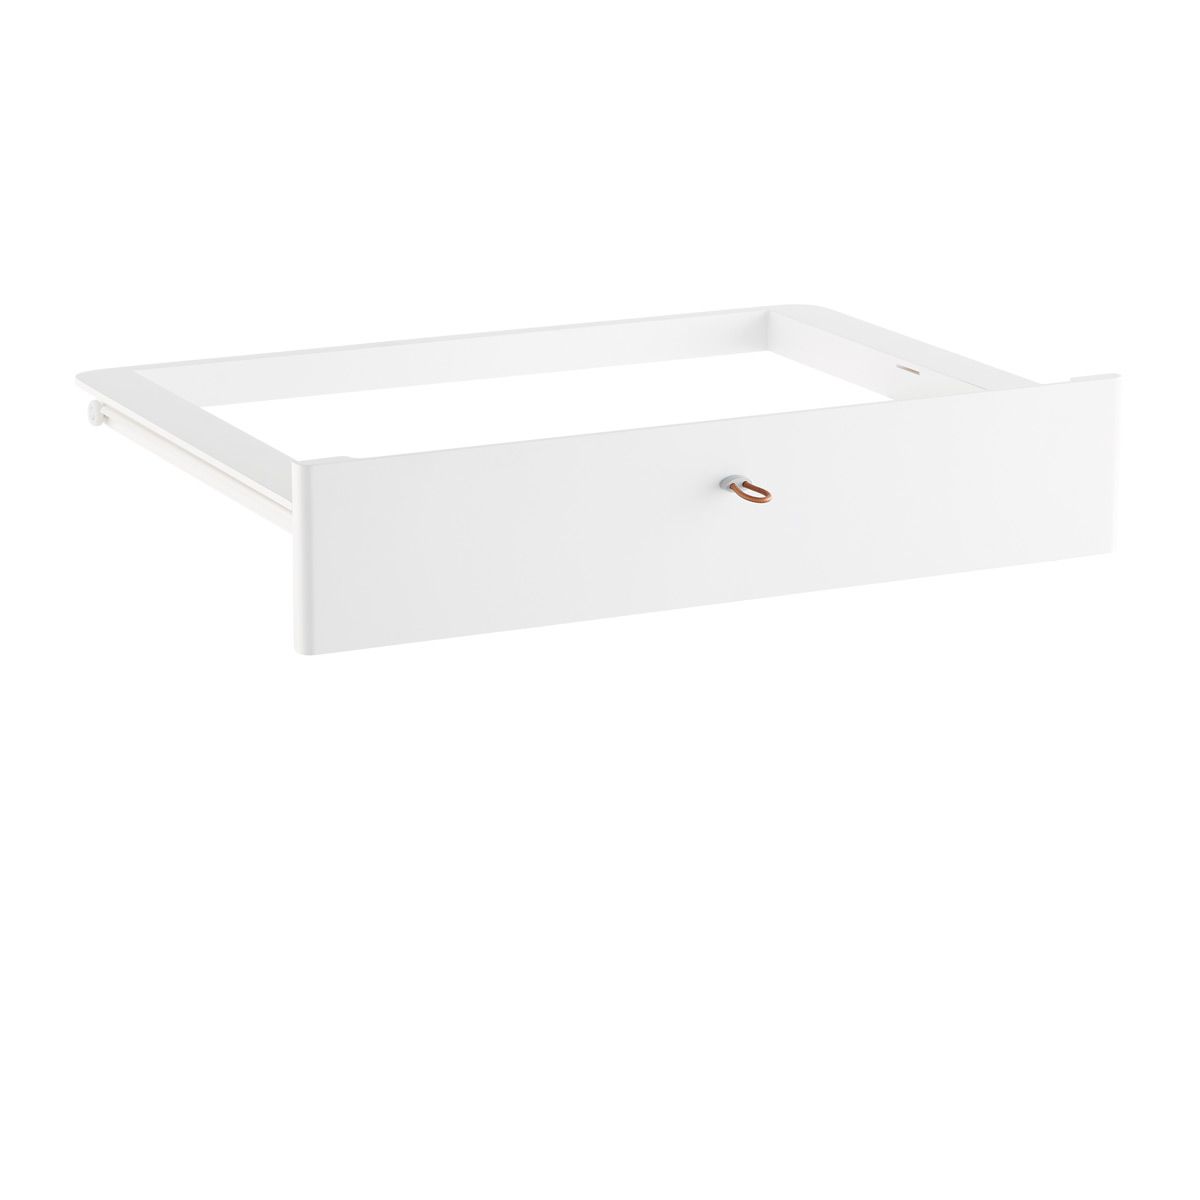 Elfa Decor 1-Runner Drawer Front and Frame Set White | The Container Store